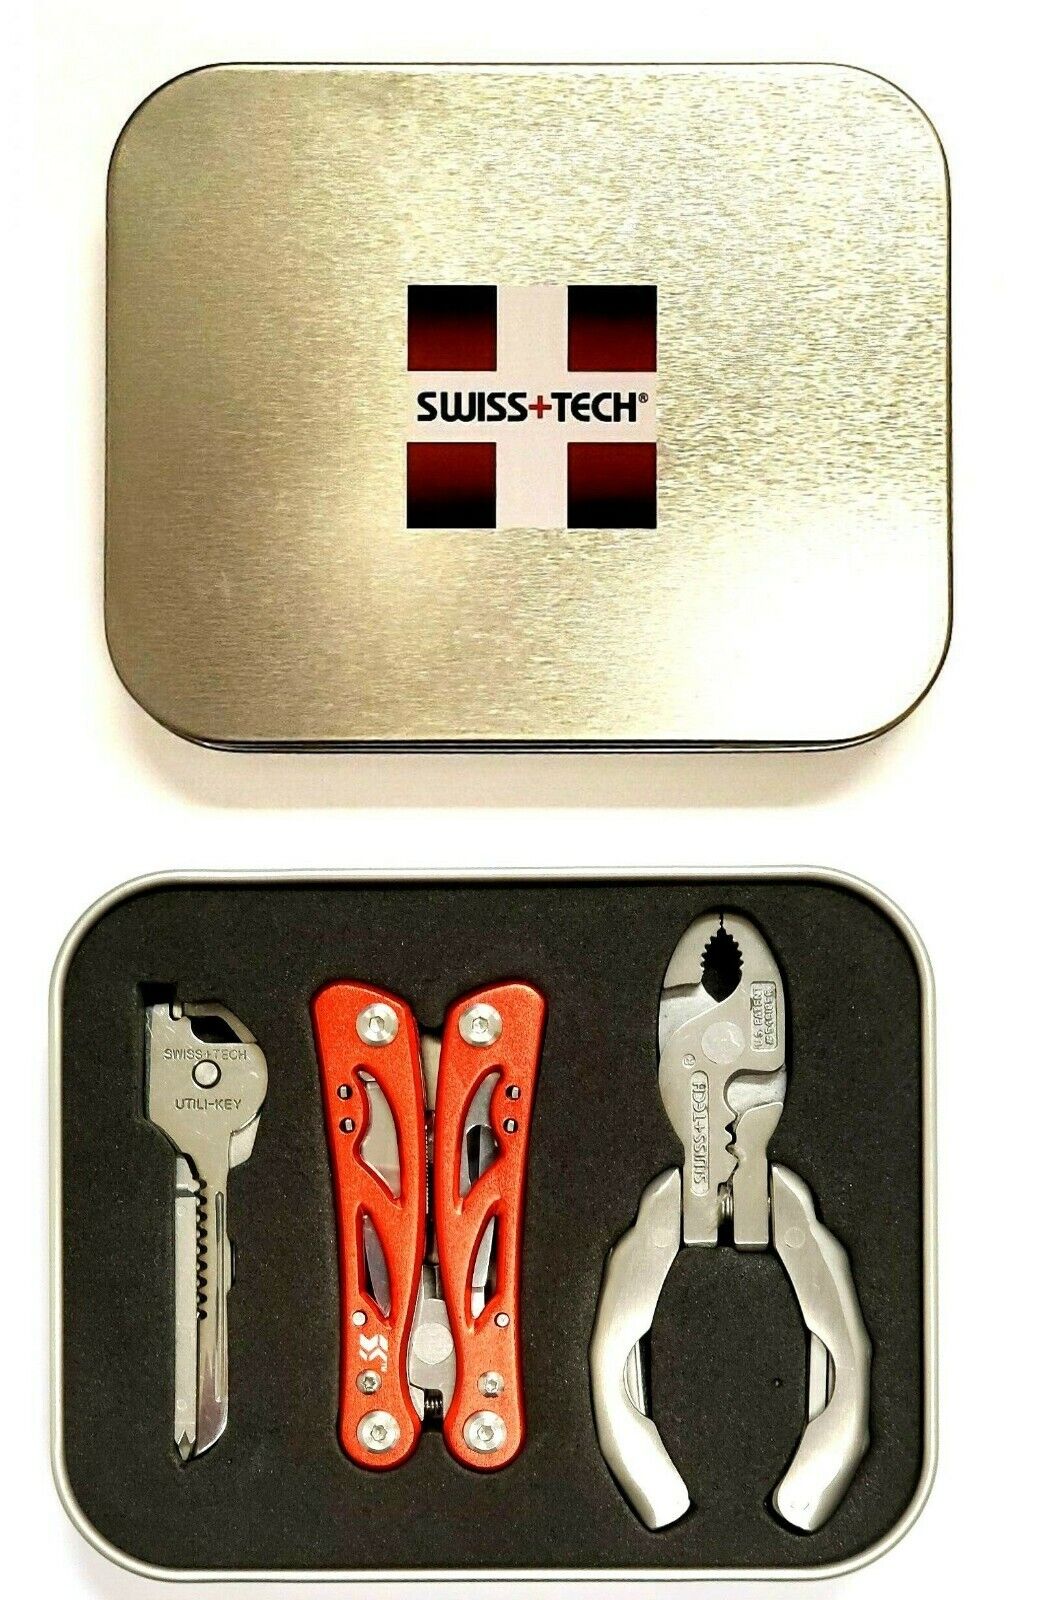 Swiss+tech Stainless Steel 12-1, 9-1 & 6-1  - 3 Tool Gift Se